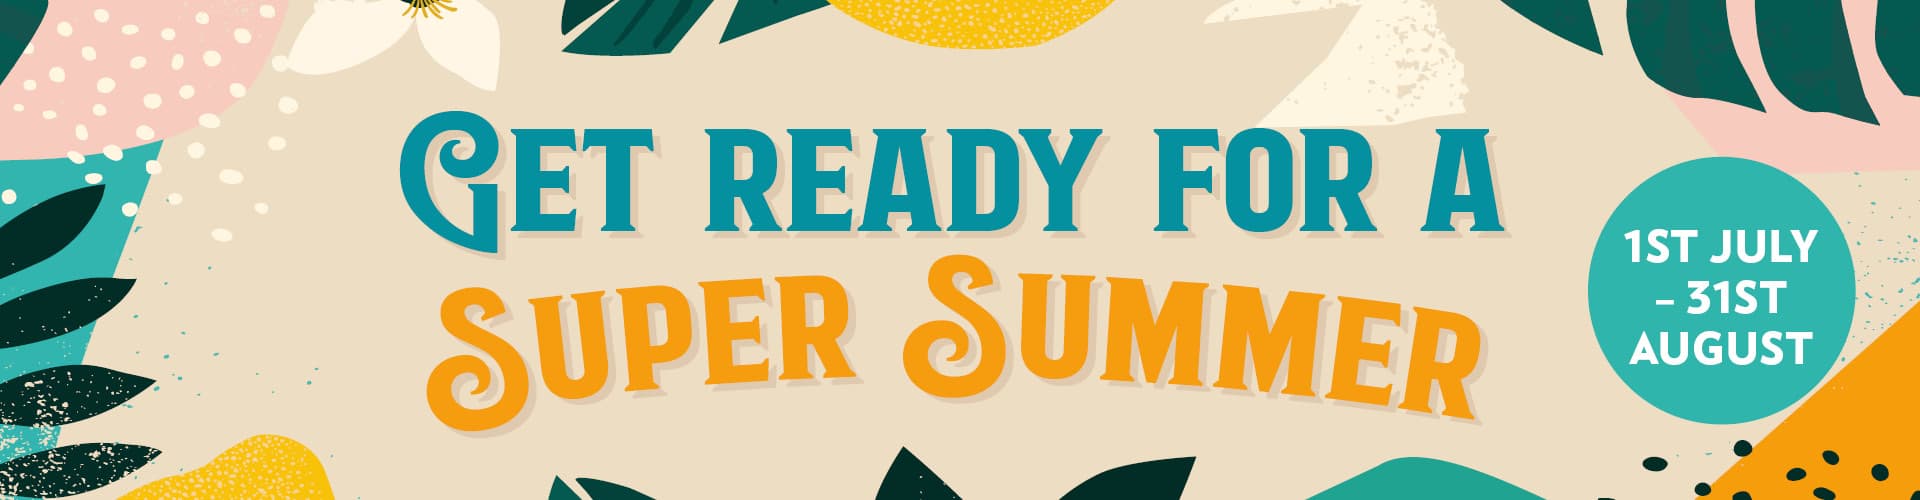 Super Summer at The Lord Nelson  Pub in Jarrow